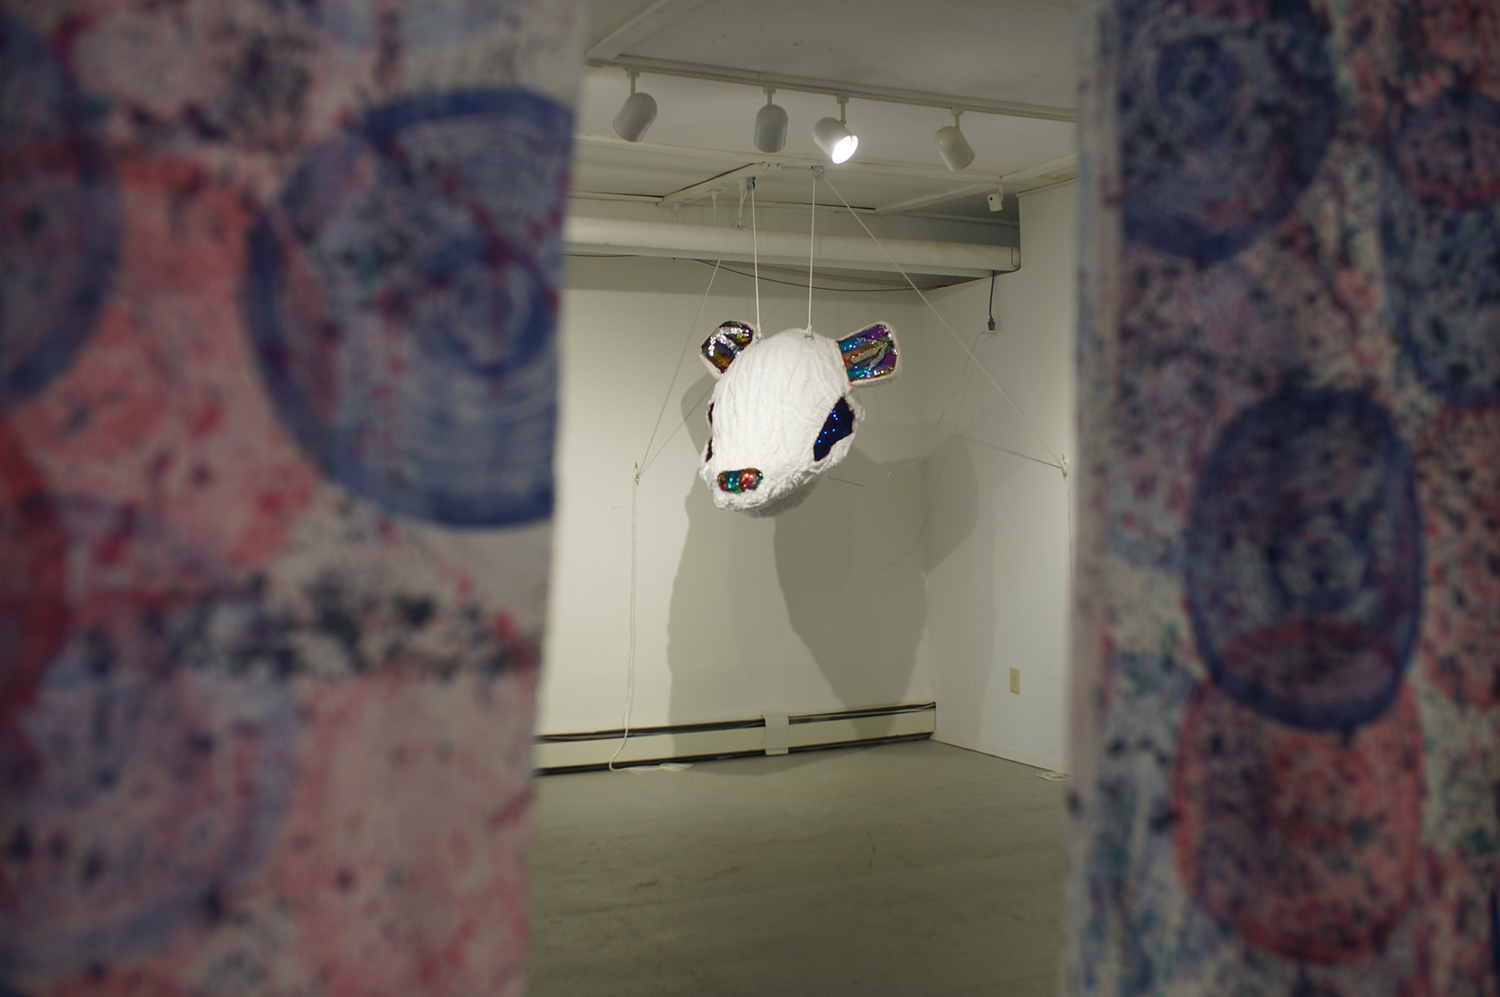 "Who Are You? Who Am I?" sculptural piece viewed between two cloths at Naomi Hutchquist's BFA thesis exhibition at Well Sreet Art Gallery in 2019. Image courtesy of Naomi Hutchquist